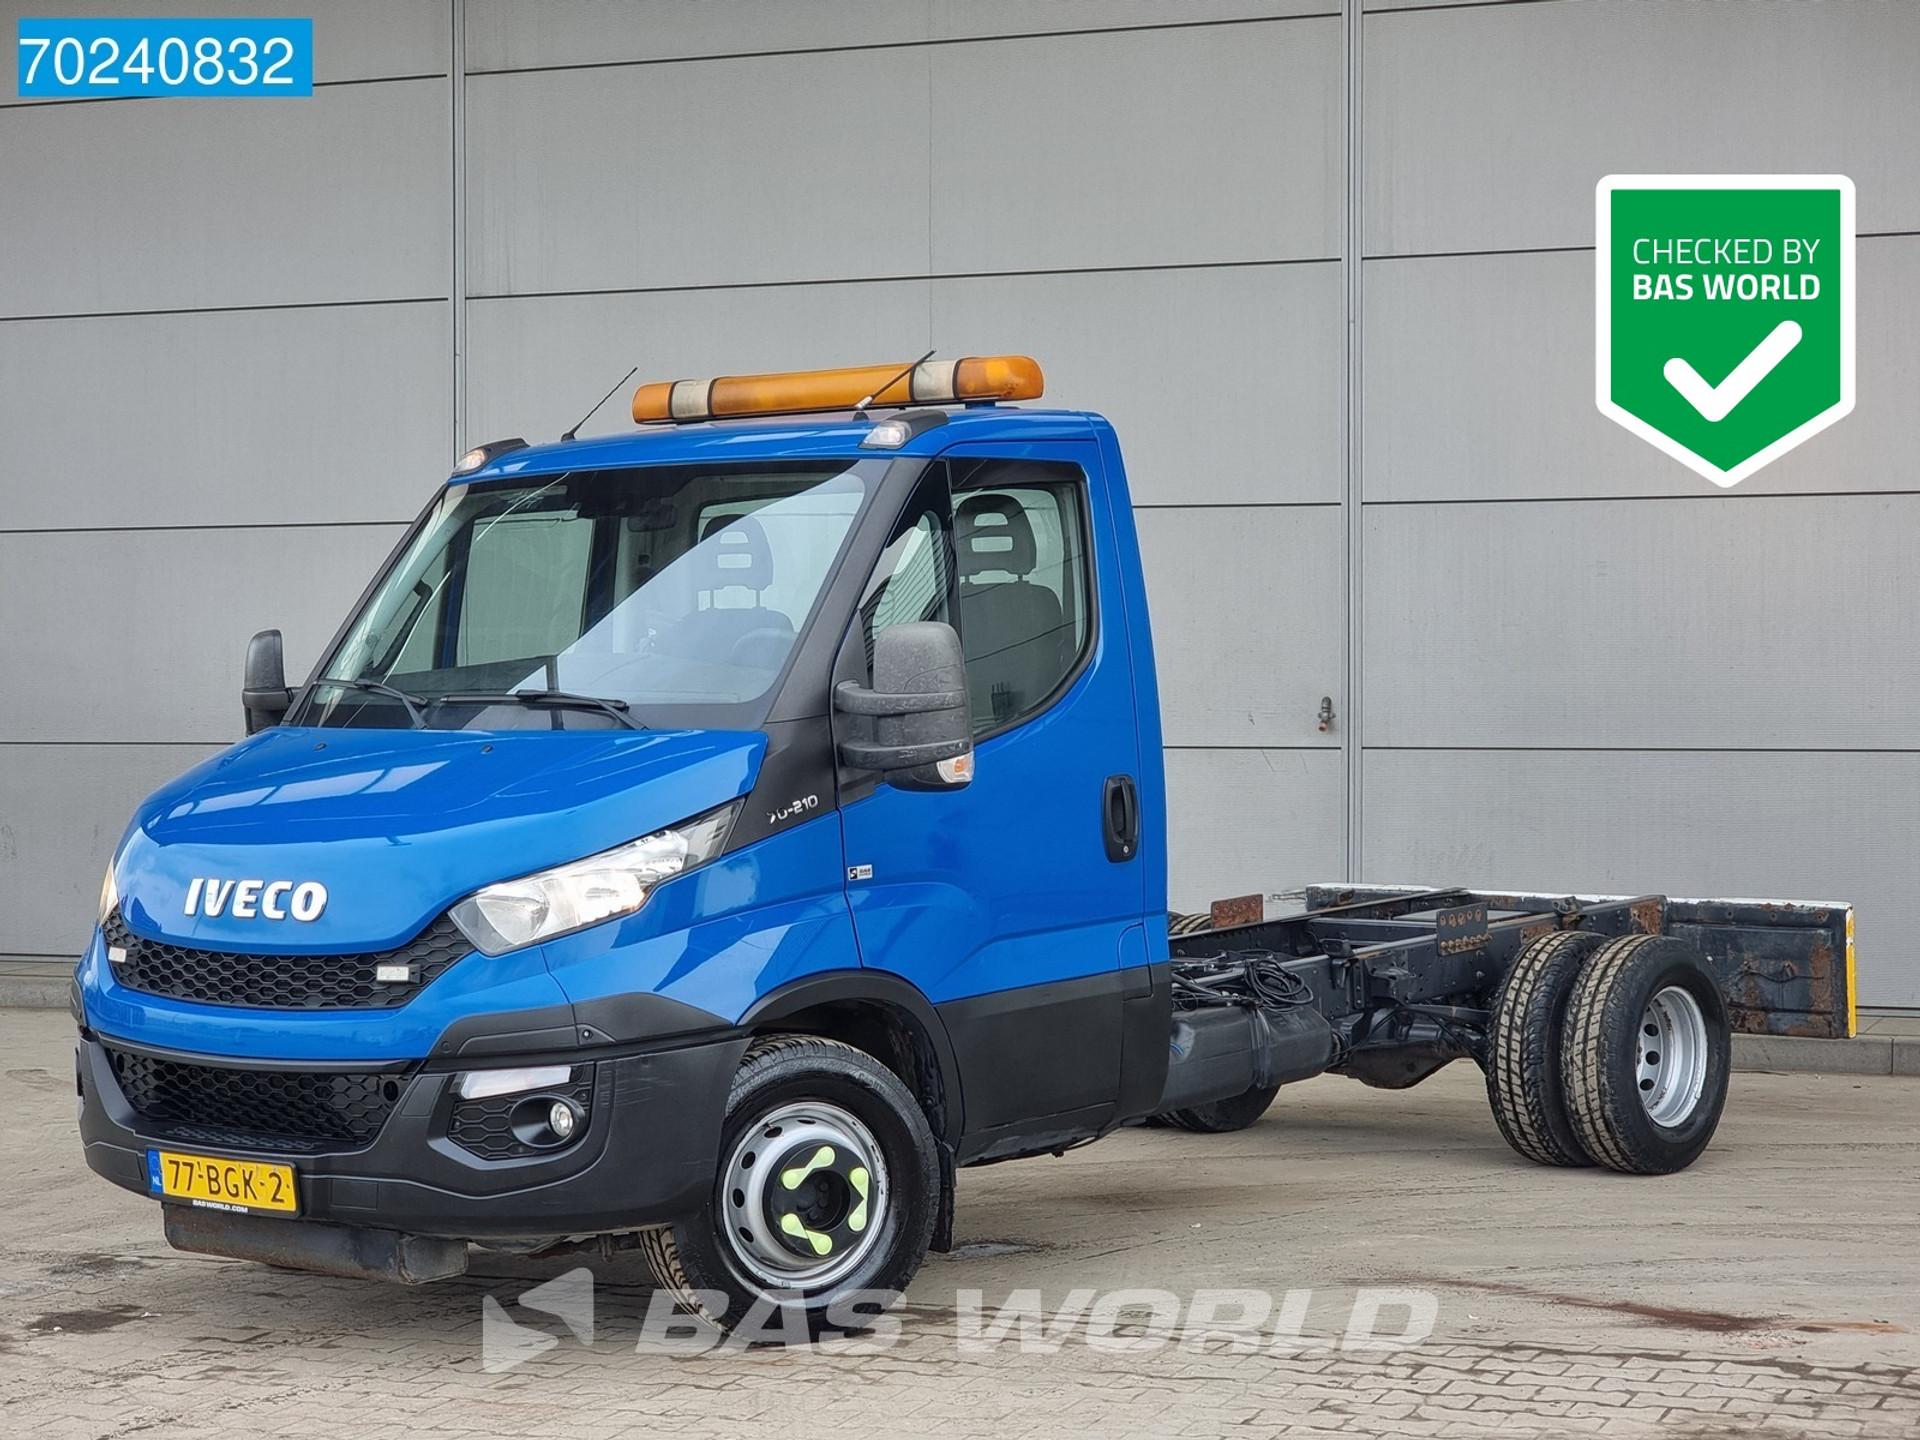 Foto 1 van Iveco Daily 70C21 3.0L 210PK 375cm wheelbase Luchtvering Chassis Cabine Fahrgestell Platform Airco Cruise control